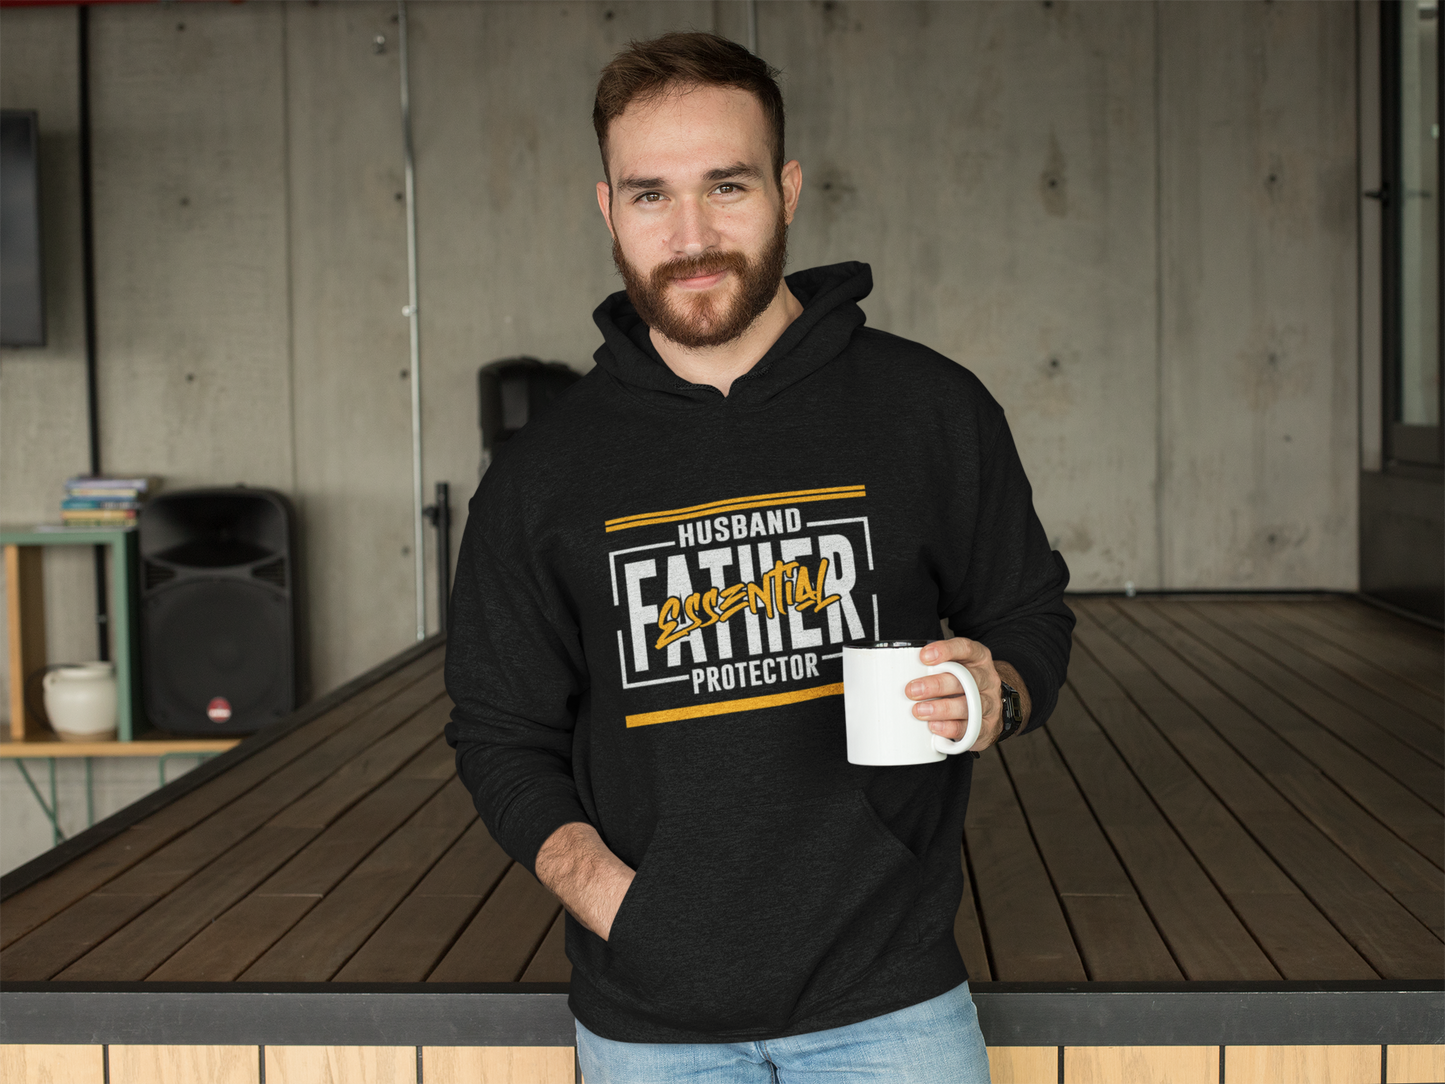 Husband Father Protector Essential Hoodie